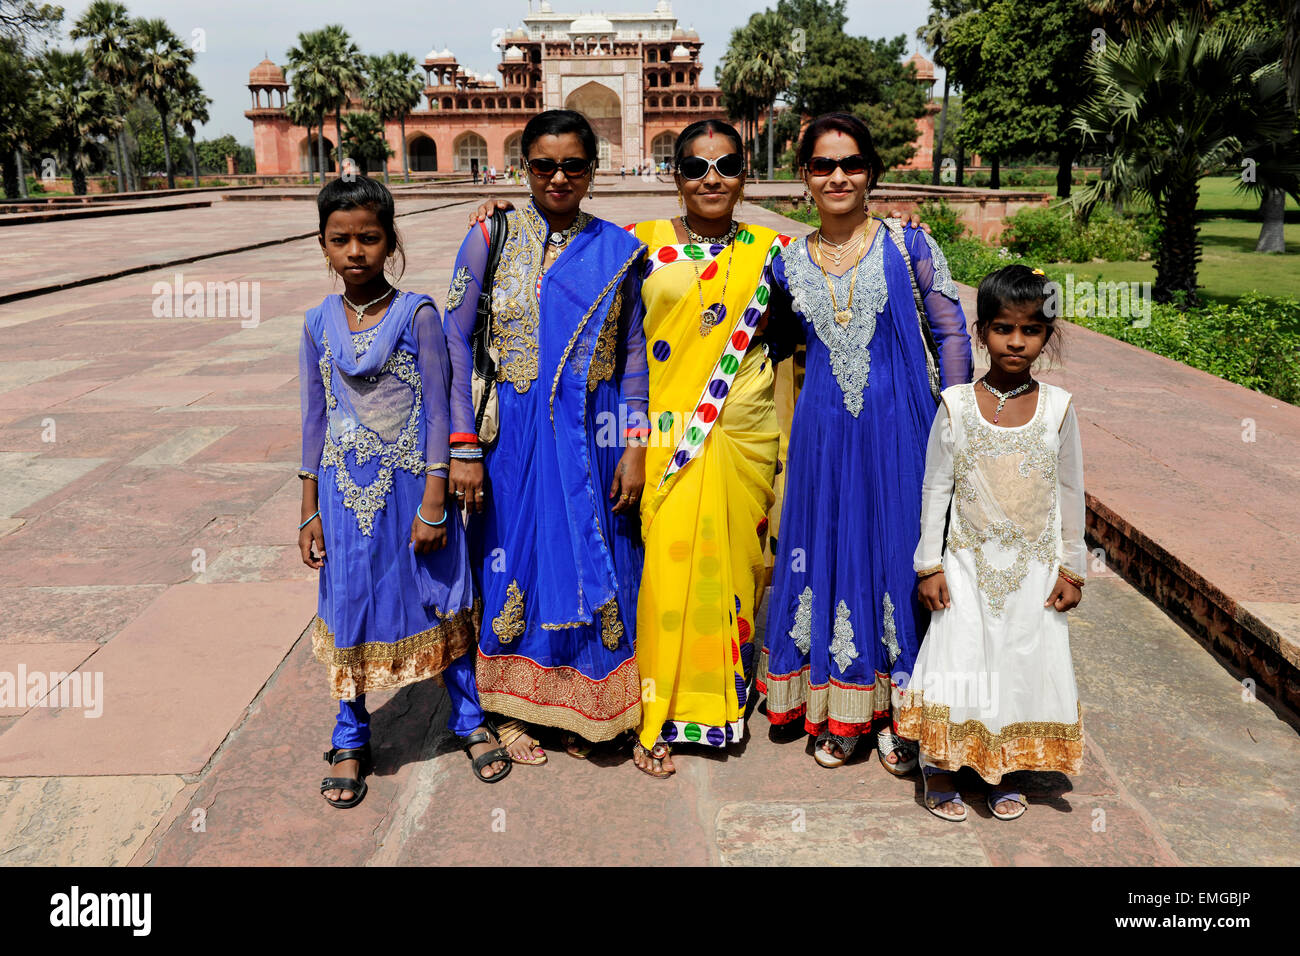 Three Indian women and two children, outside of Fatehpur Sikri, Uttar Pradesh, India, which was once the capital of the Mughal E Stock Photo